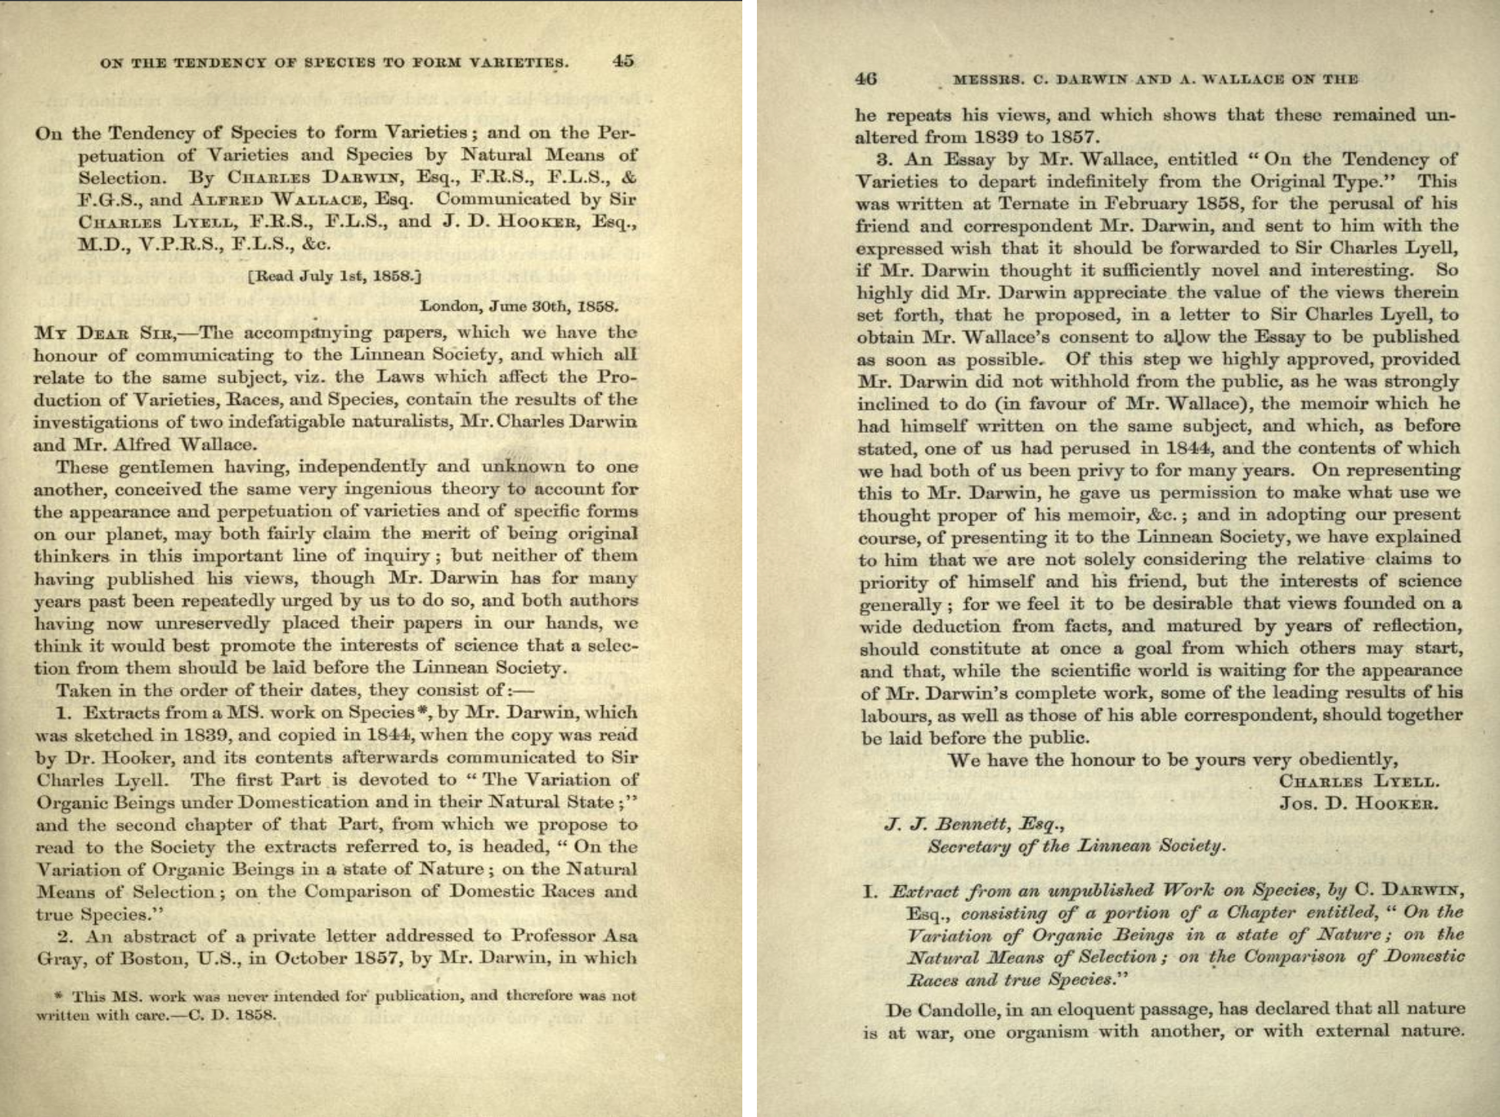 The first two pages of "On the tendency of species to form Varieties; and on the Perpetuation of varieties and species by natural means of selection" by Charles Darwin and Alfred Wallace (July 1, 1858).